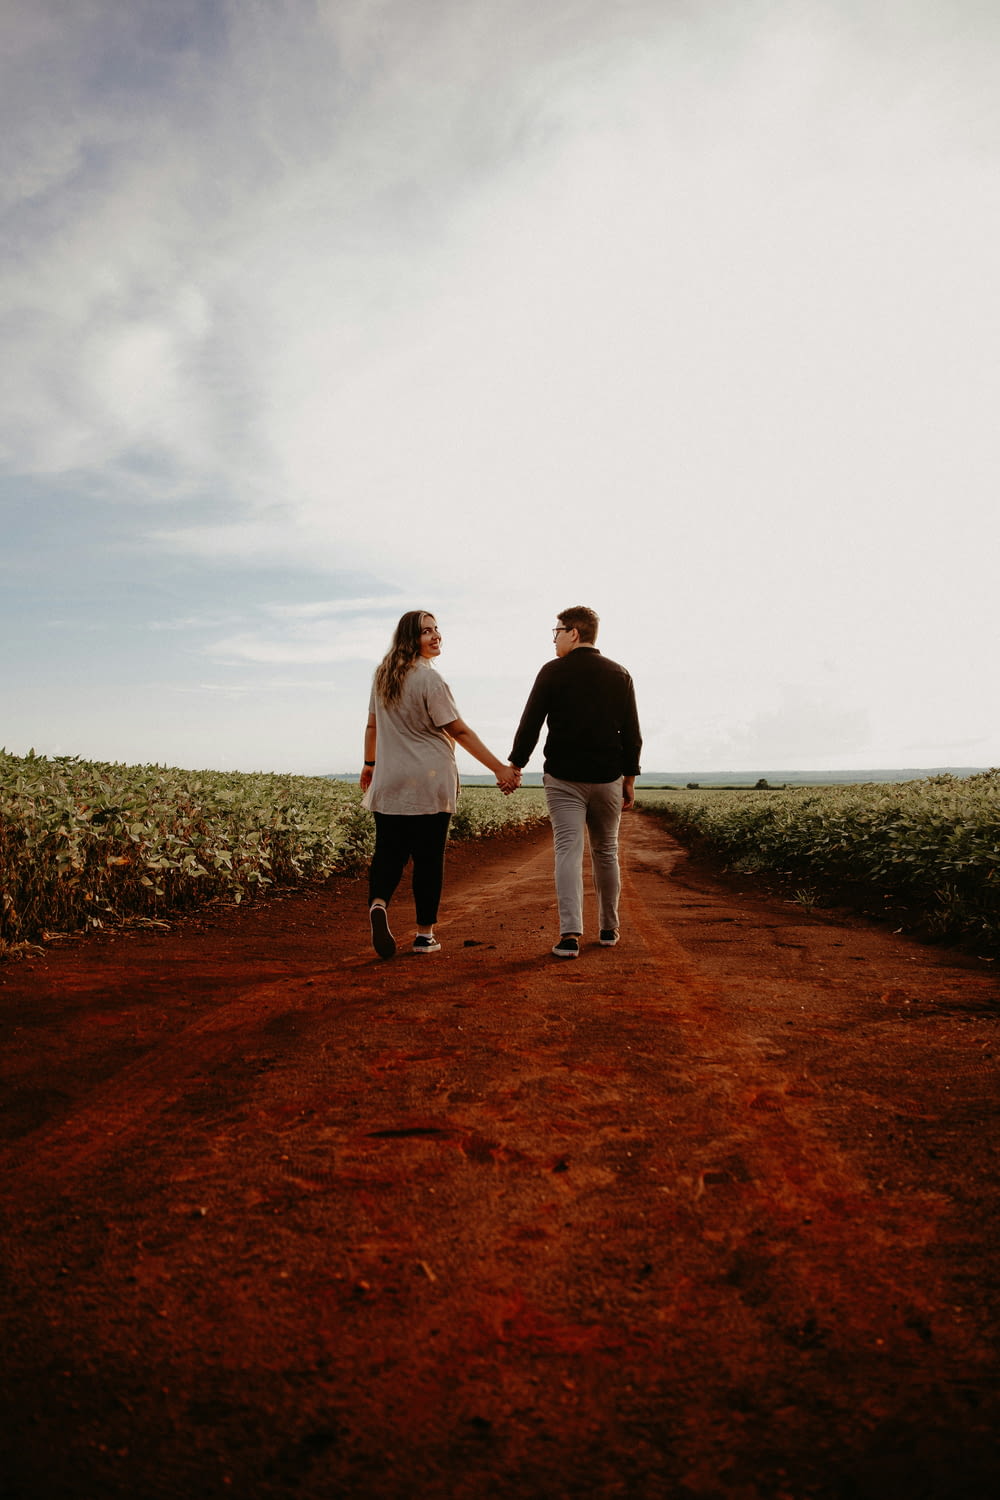 a man and woman holding hands walking down a dirt road